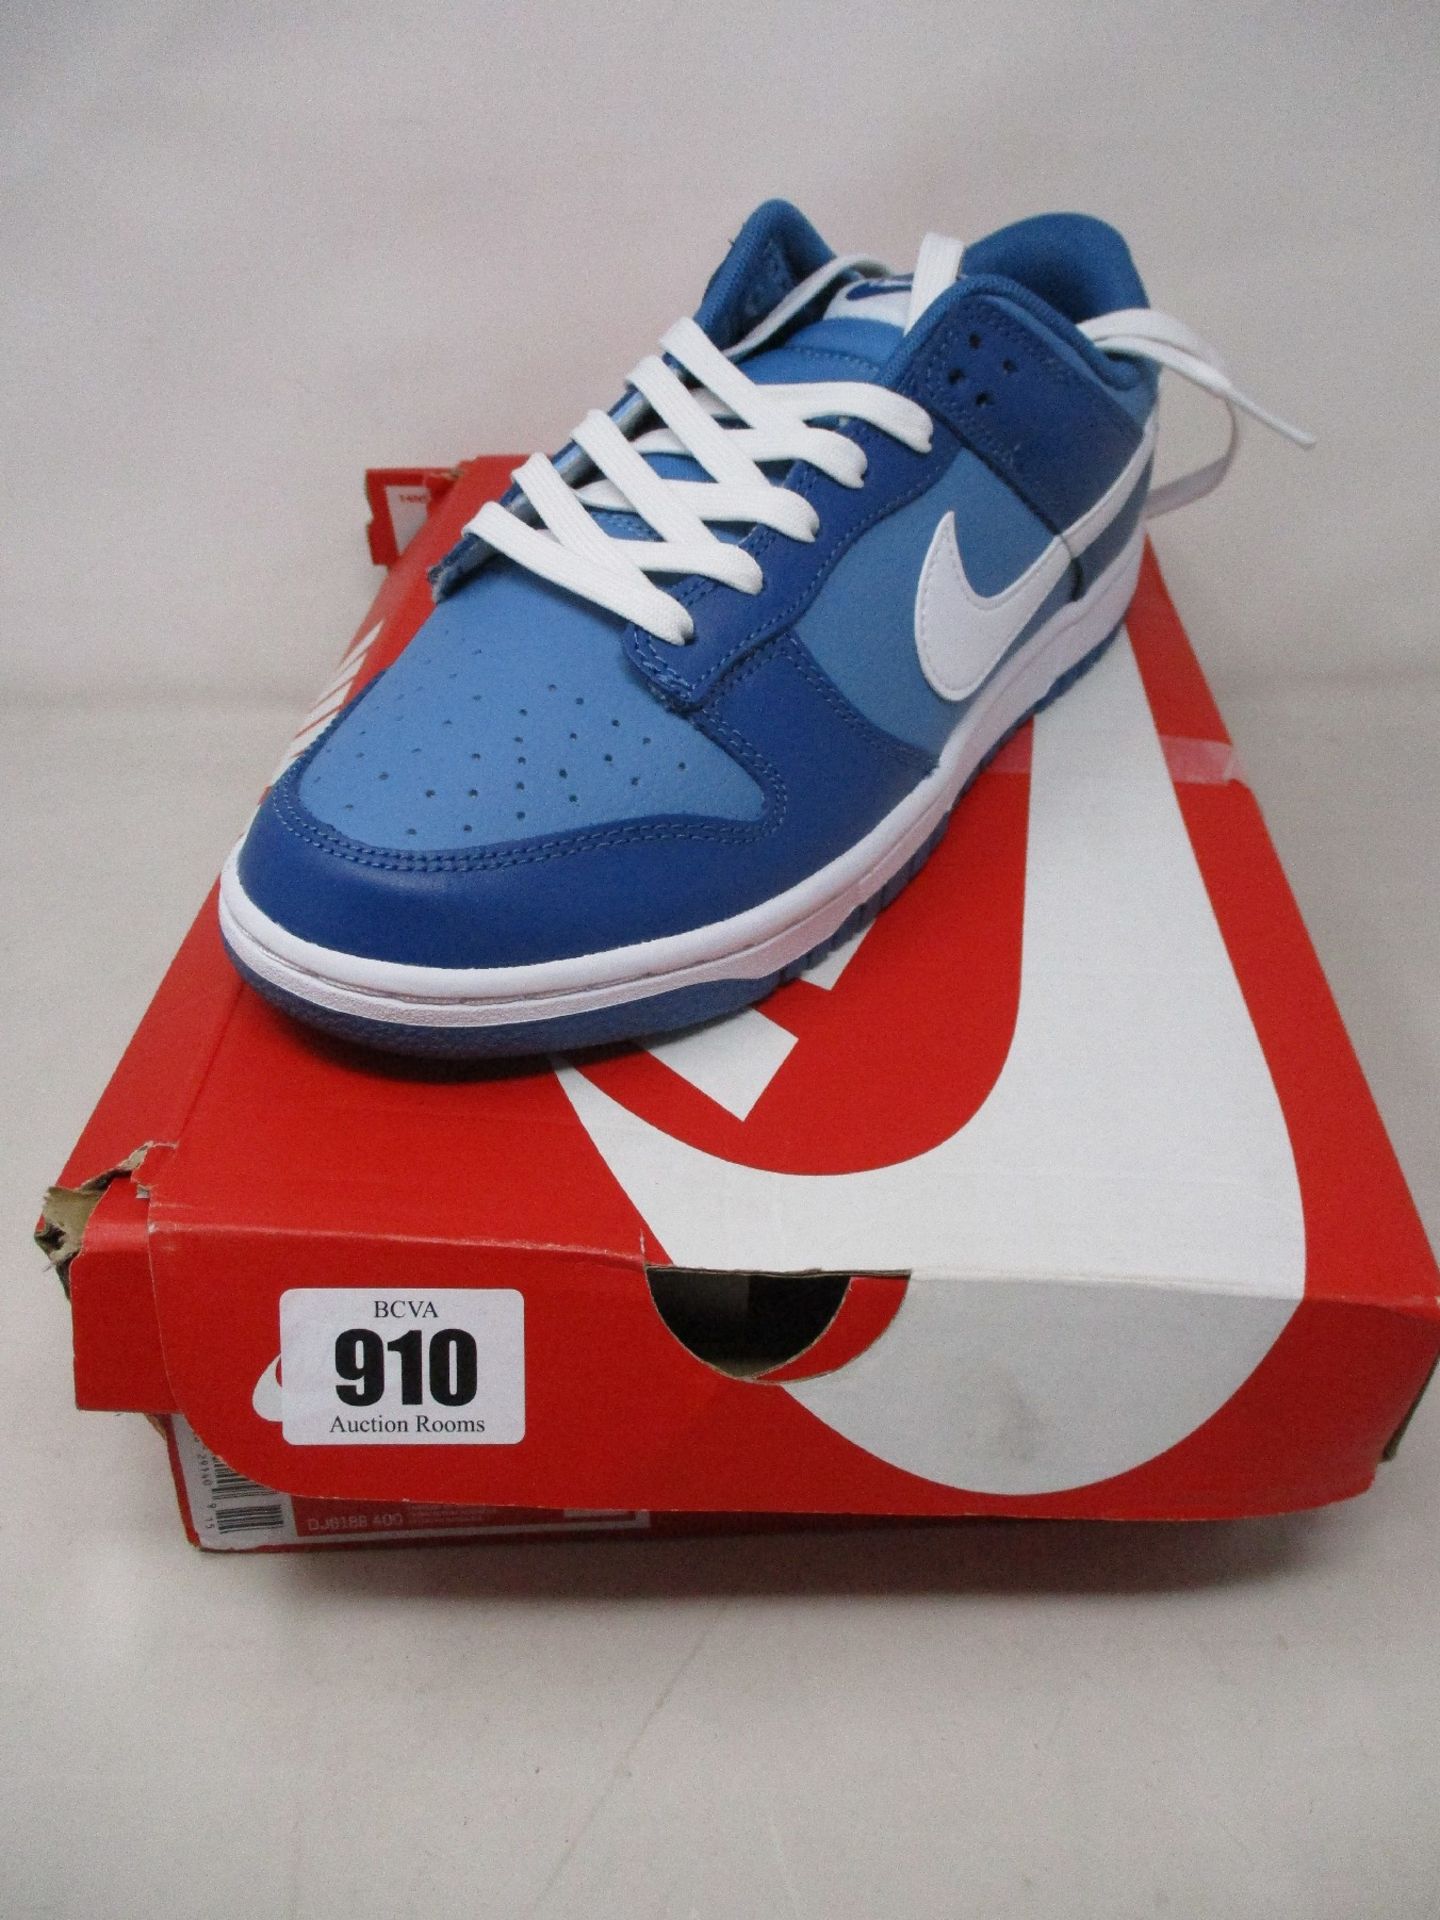 A pair of Nike Dunk low retro marina blue/white trainers (Size UK 6) (Outer box damaged).